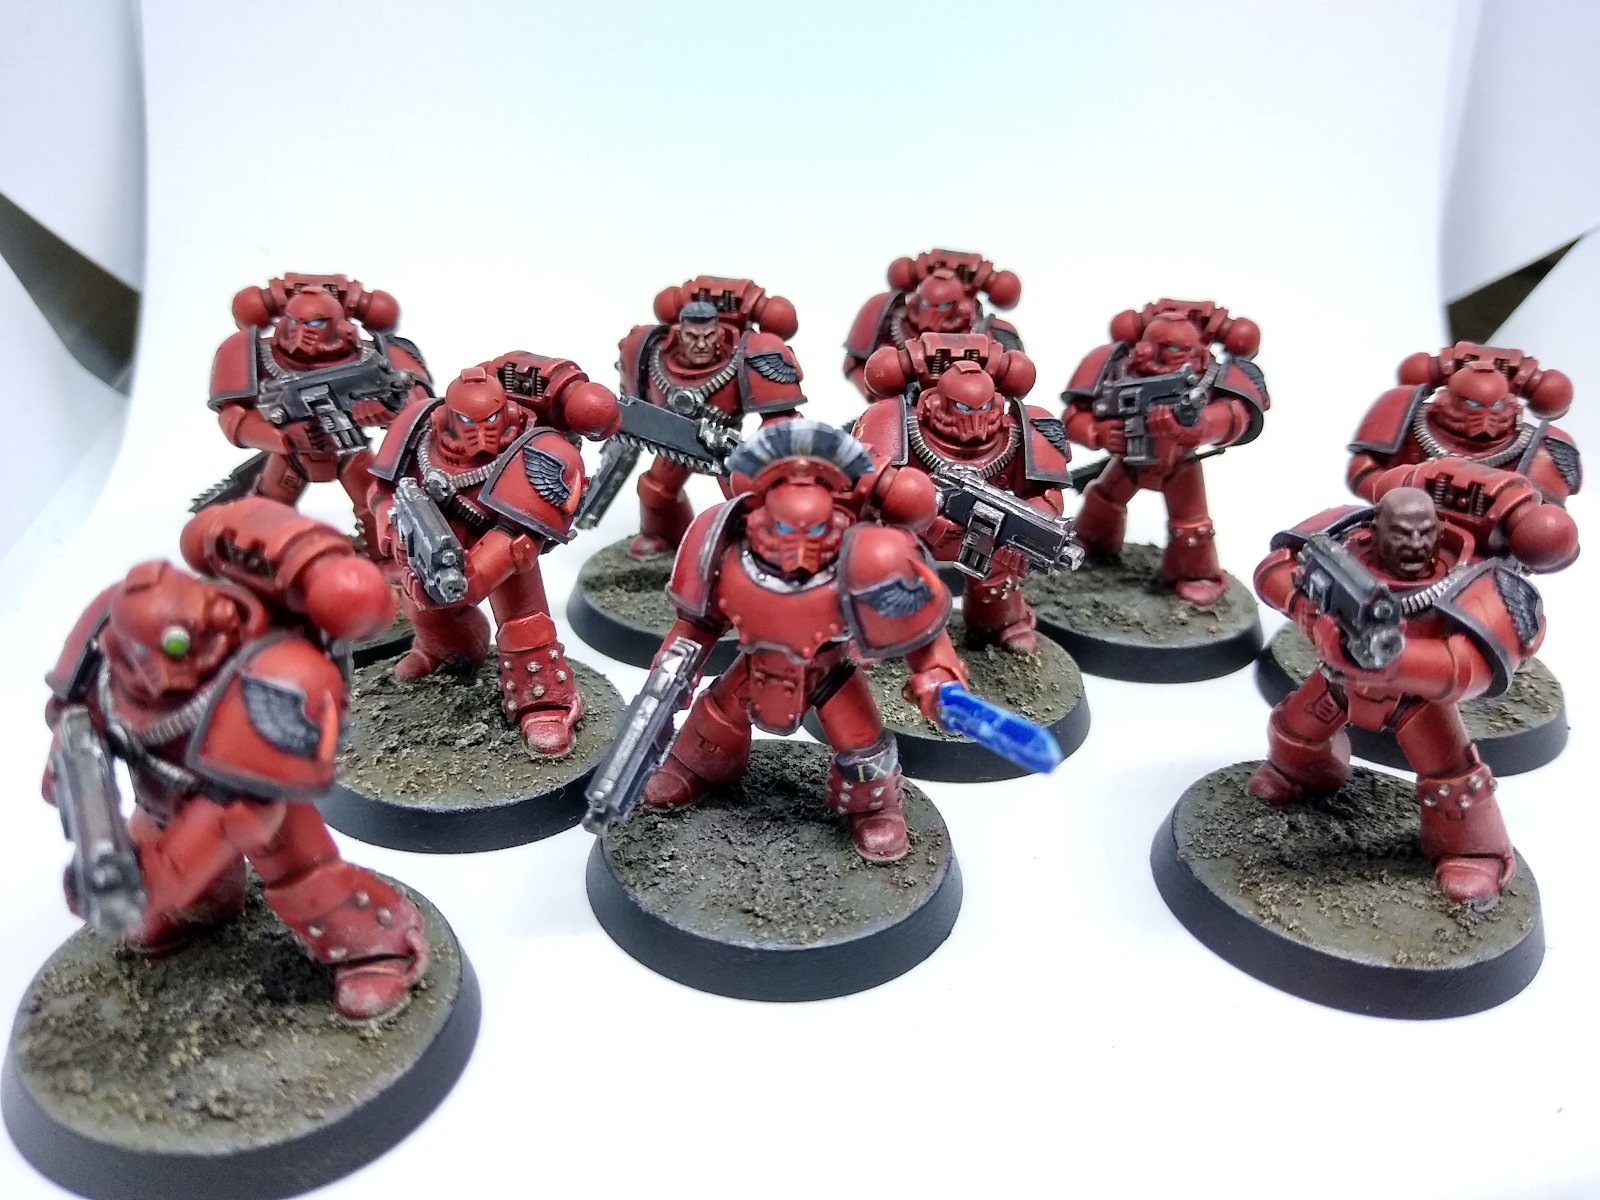 A squad of 10 space marines painted in the legion colours of the Blood Angels, red armour with black trim. They are armed with bolters and combat blades, and the sergeant additionally has a power sword along with a black-and-white crest on his helmet.